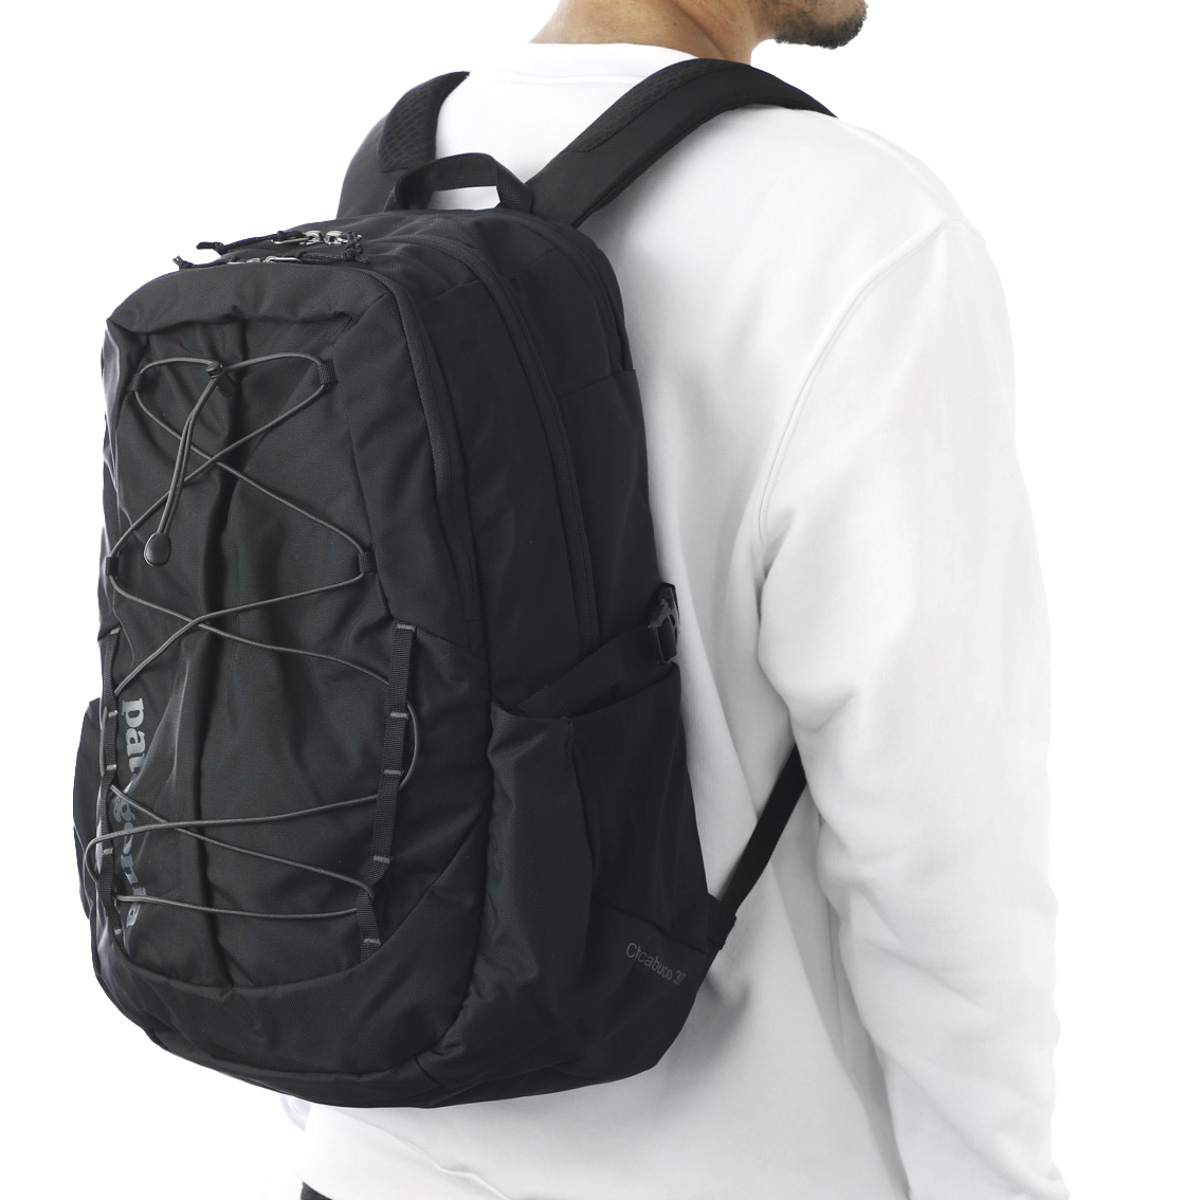 patagonia パタゴニア バックパック 30L【返品送料無料】【ラッピング無料】 BACKPACK CHACABUCO blk 47927 メンズ ブラック バックパック・リュック